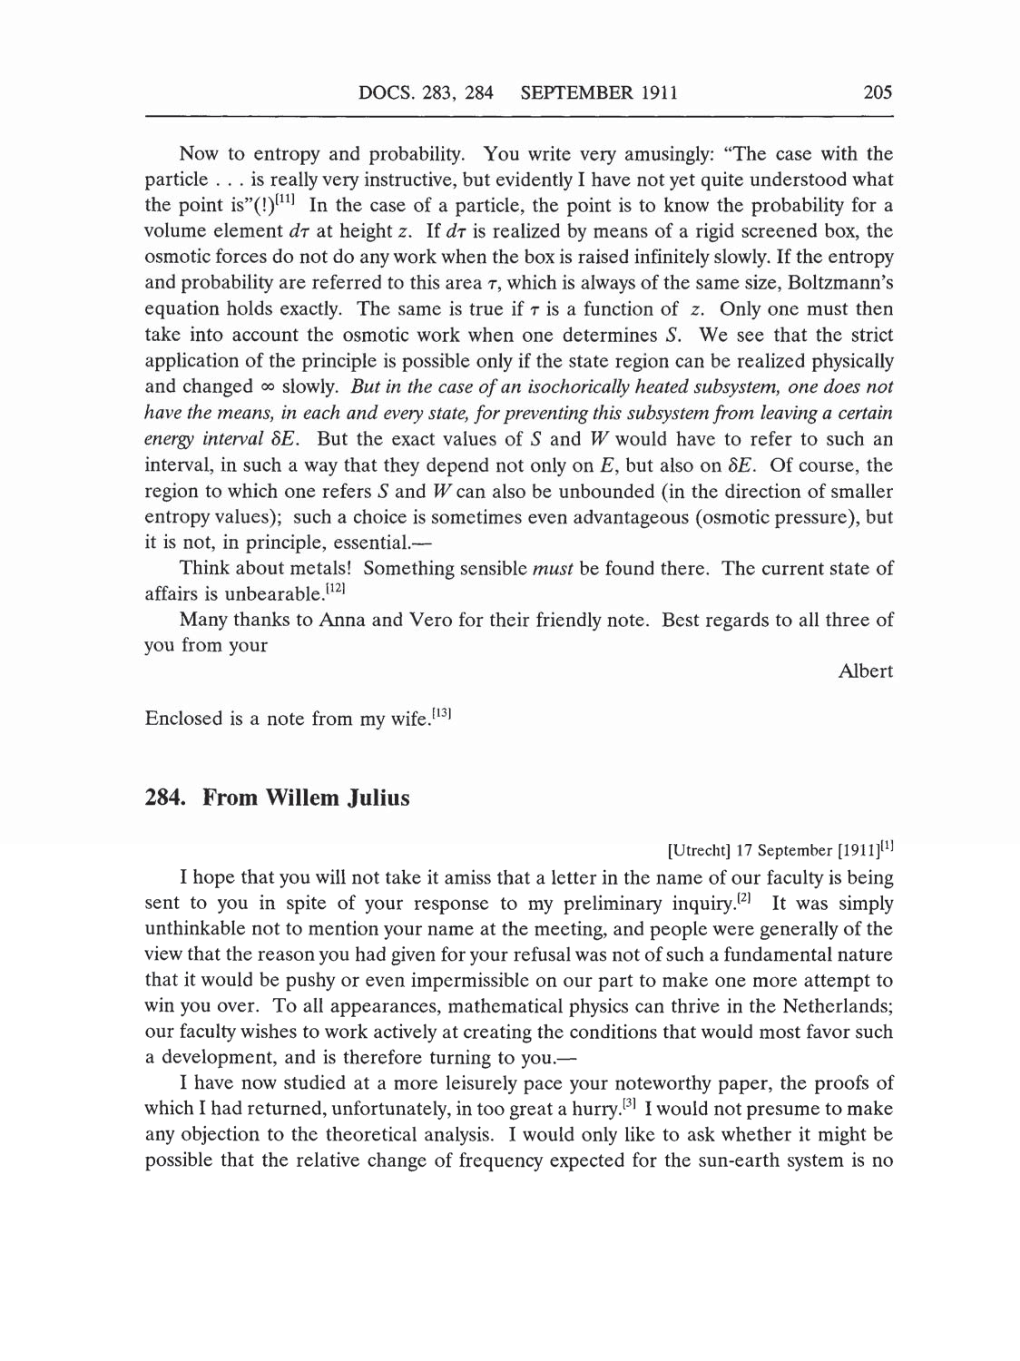 Volume 5: The Swiss Years: Correspondence, 1902-1914 (English translation supplement) page 205